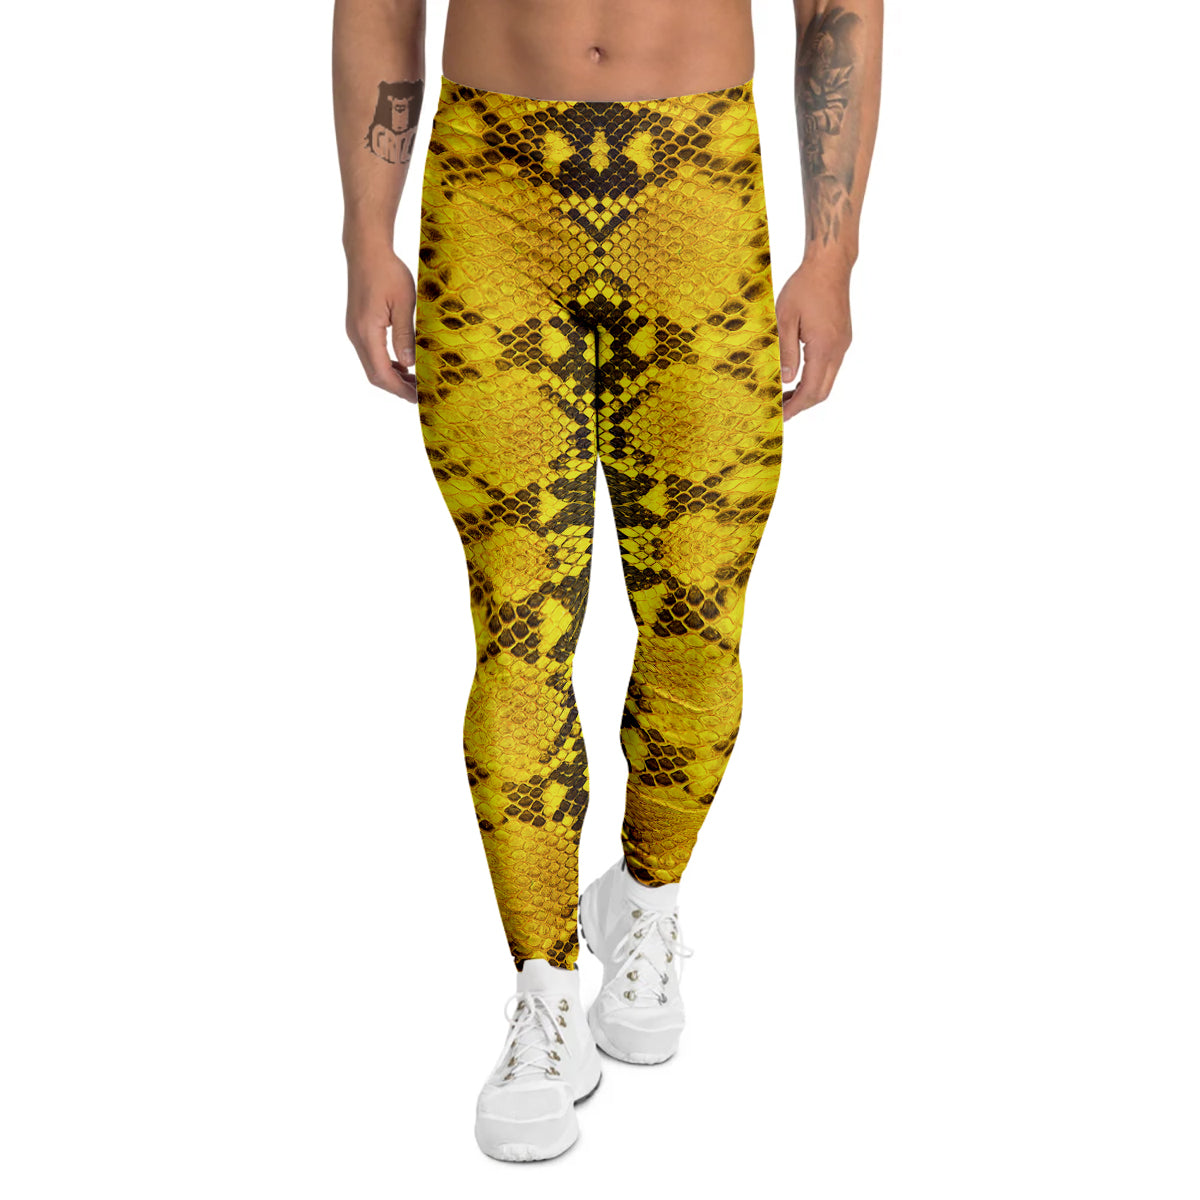 Buy Planks men sportswear fit brand logo training 3 4 tights yellow Online  | Brands For Less